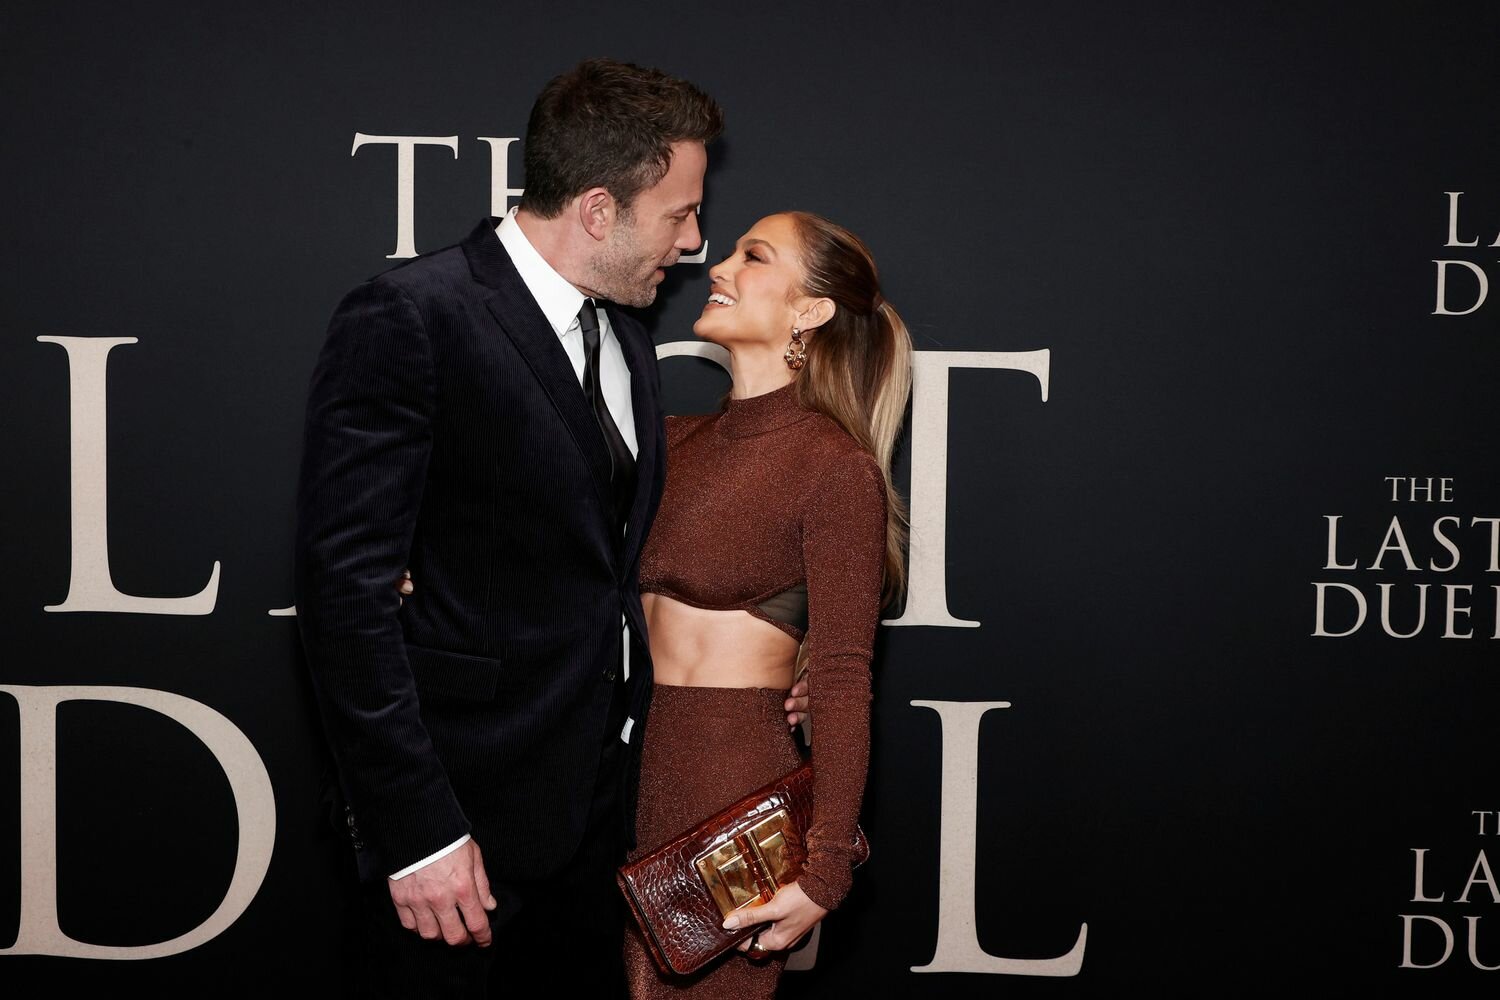 Jennifer Lopez and Ben Affleck Looking Into Each Other's Eyes 'The Last Duel' Premiere 2021